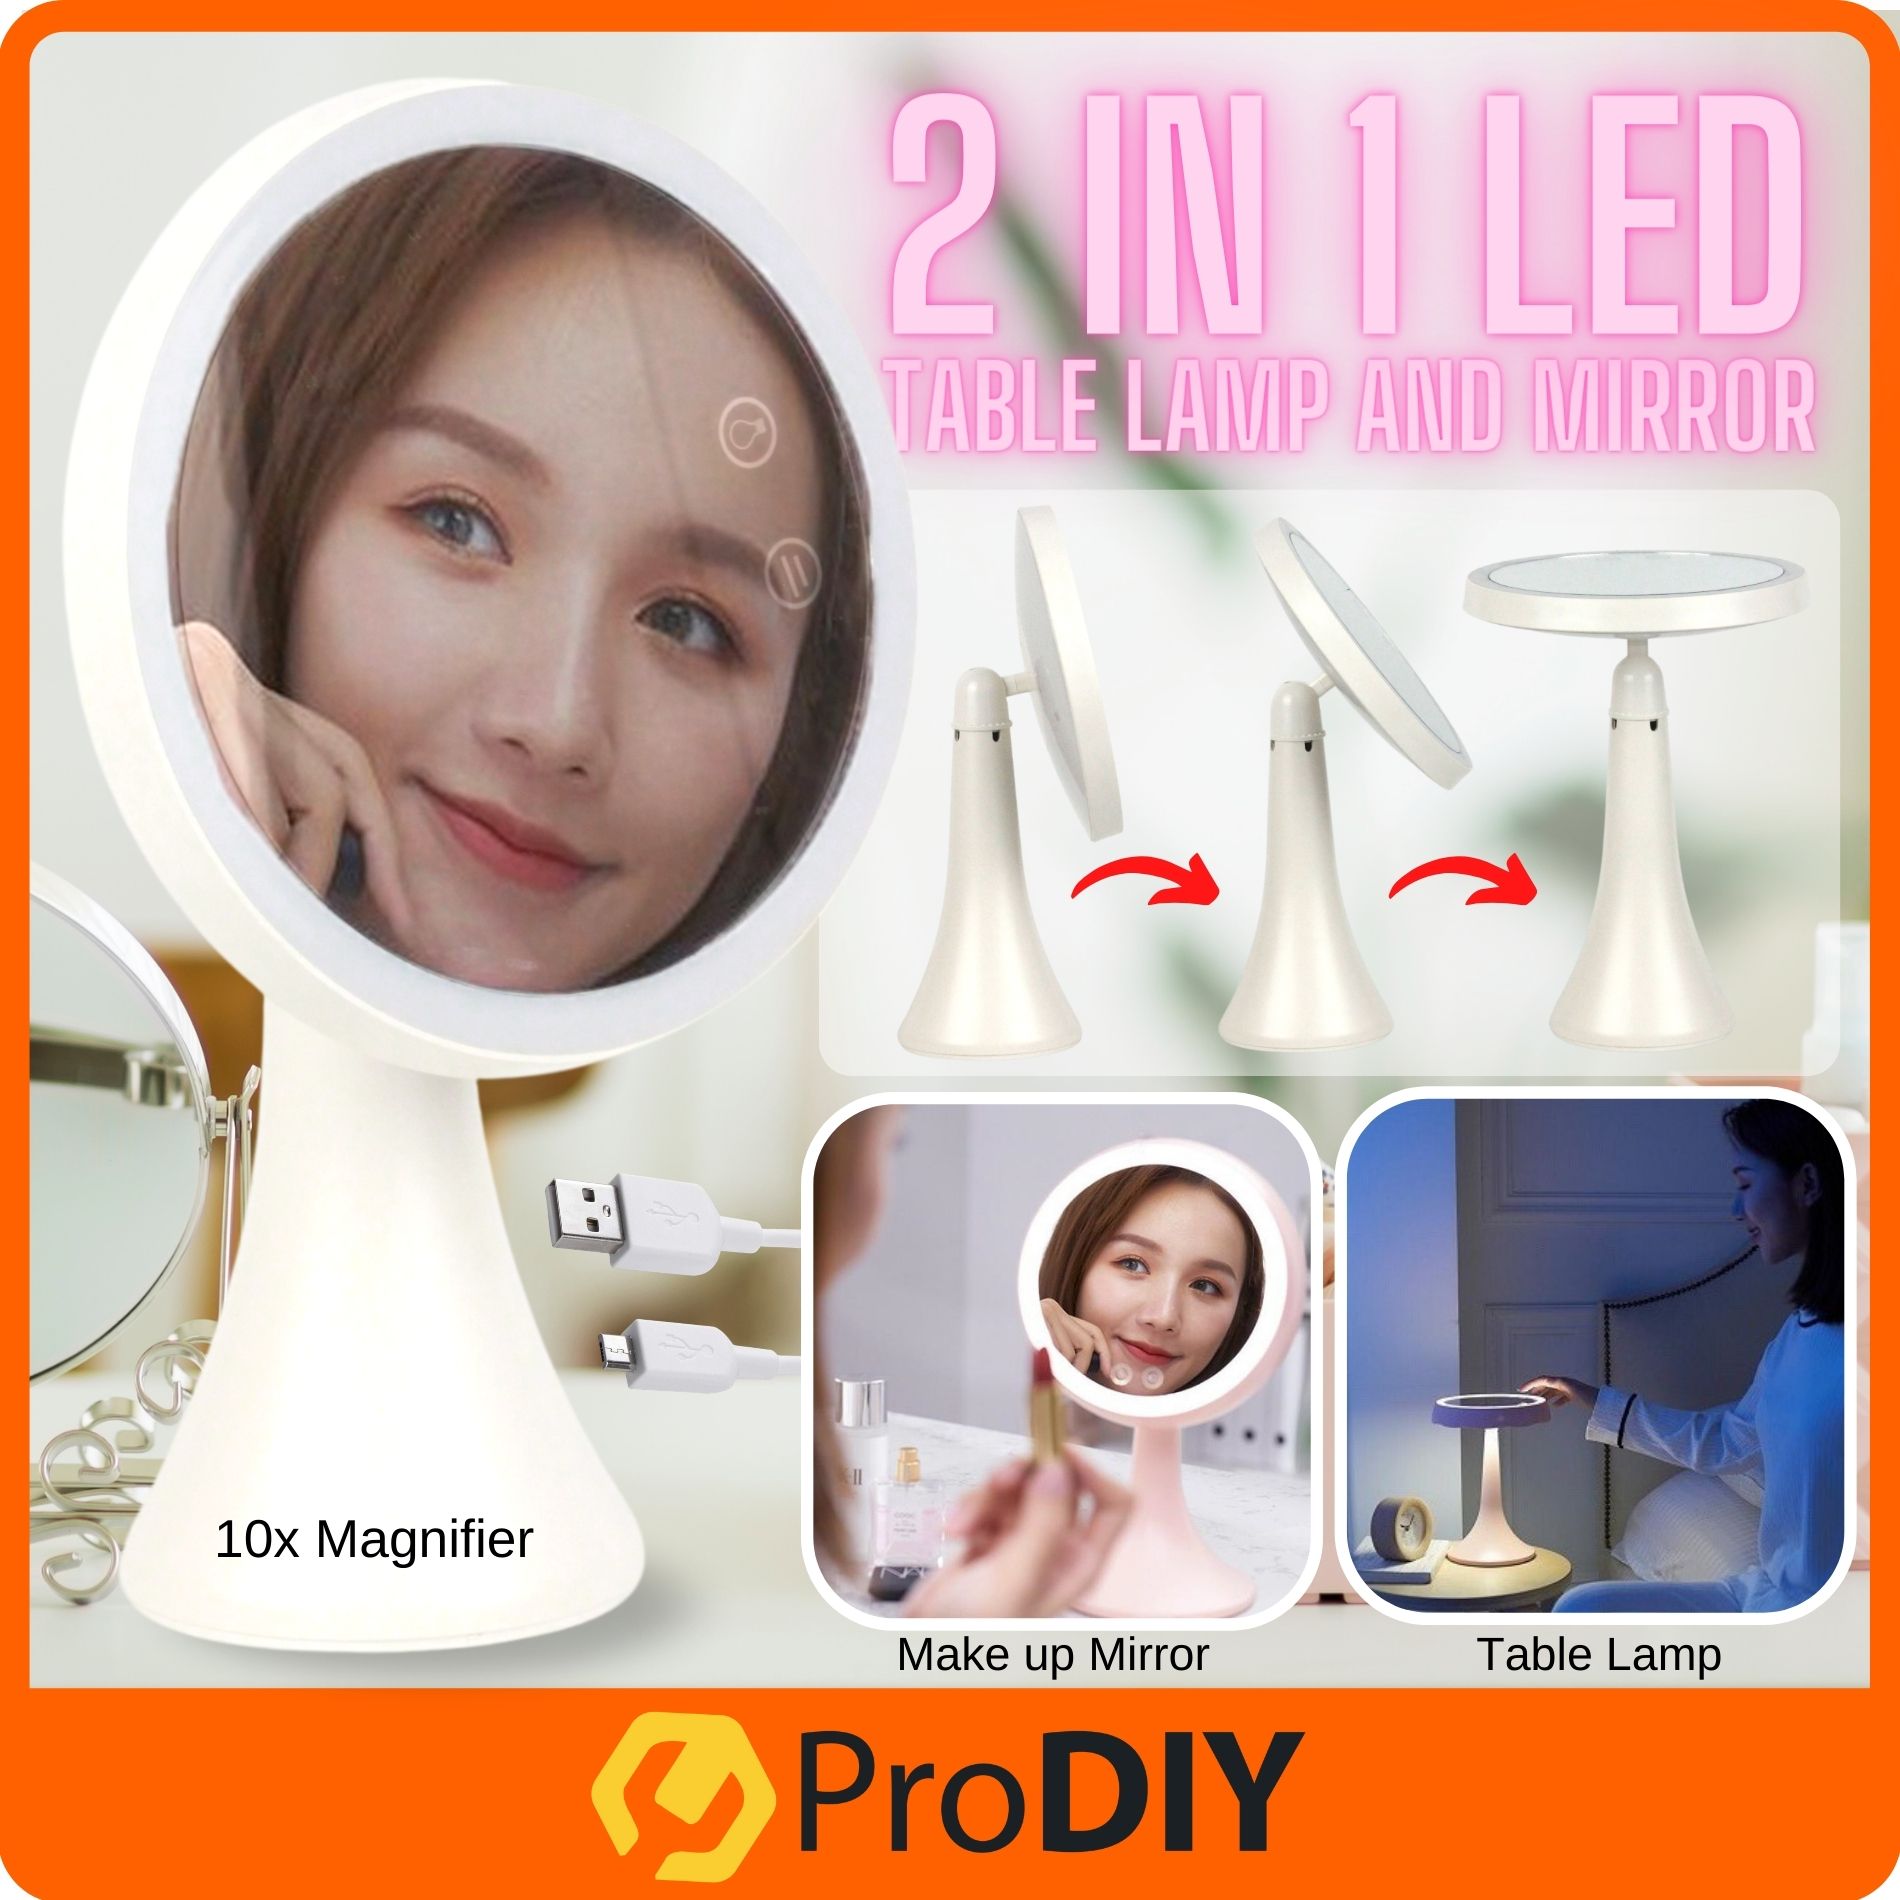 2 in 1 LED Table Lamp with Makeup Mirror Rotable Touch Screen 3 Mode USB Charging Cermin Solek Lampu Meja ( HS-169 )